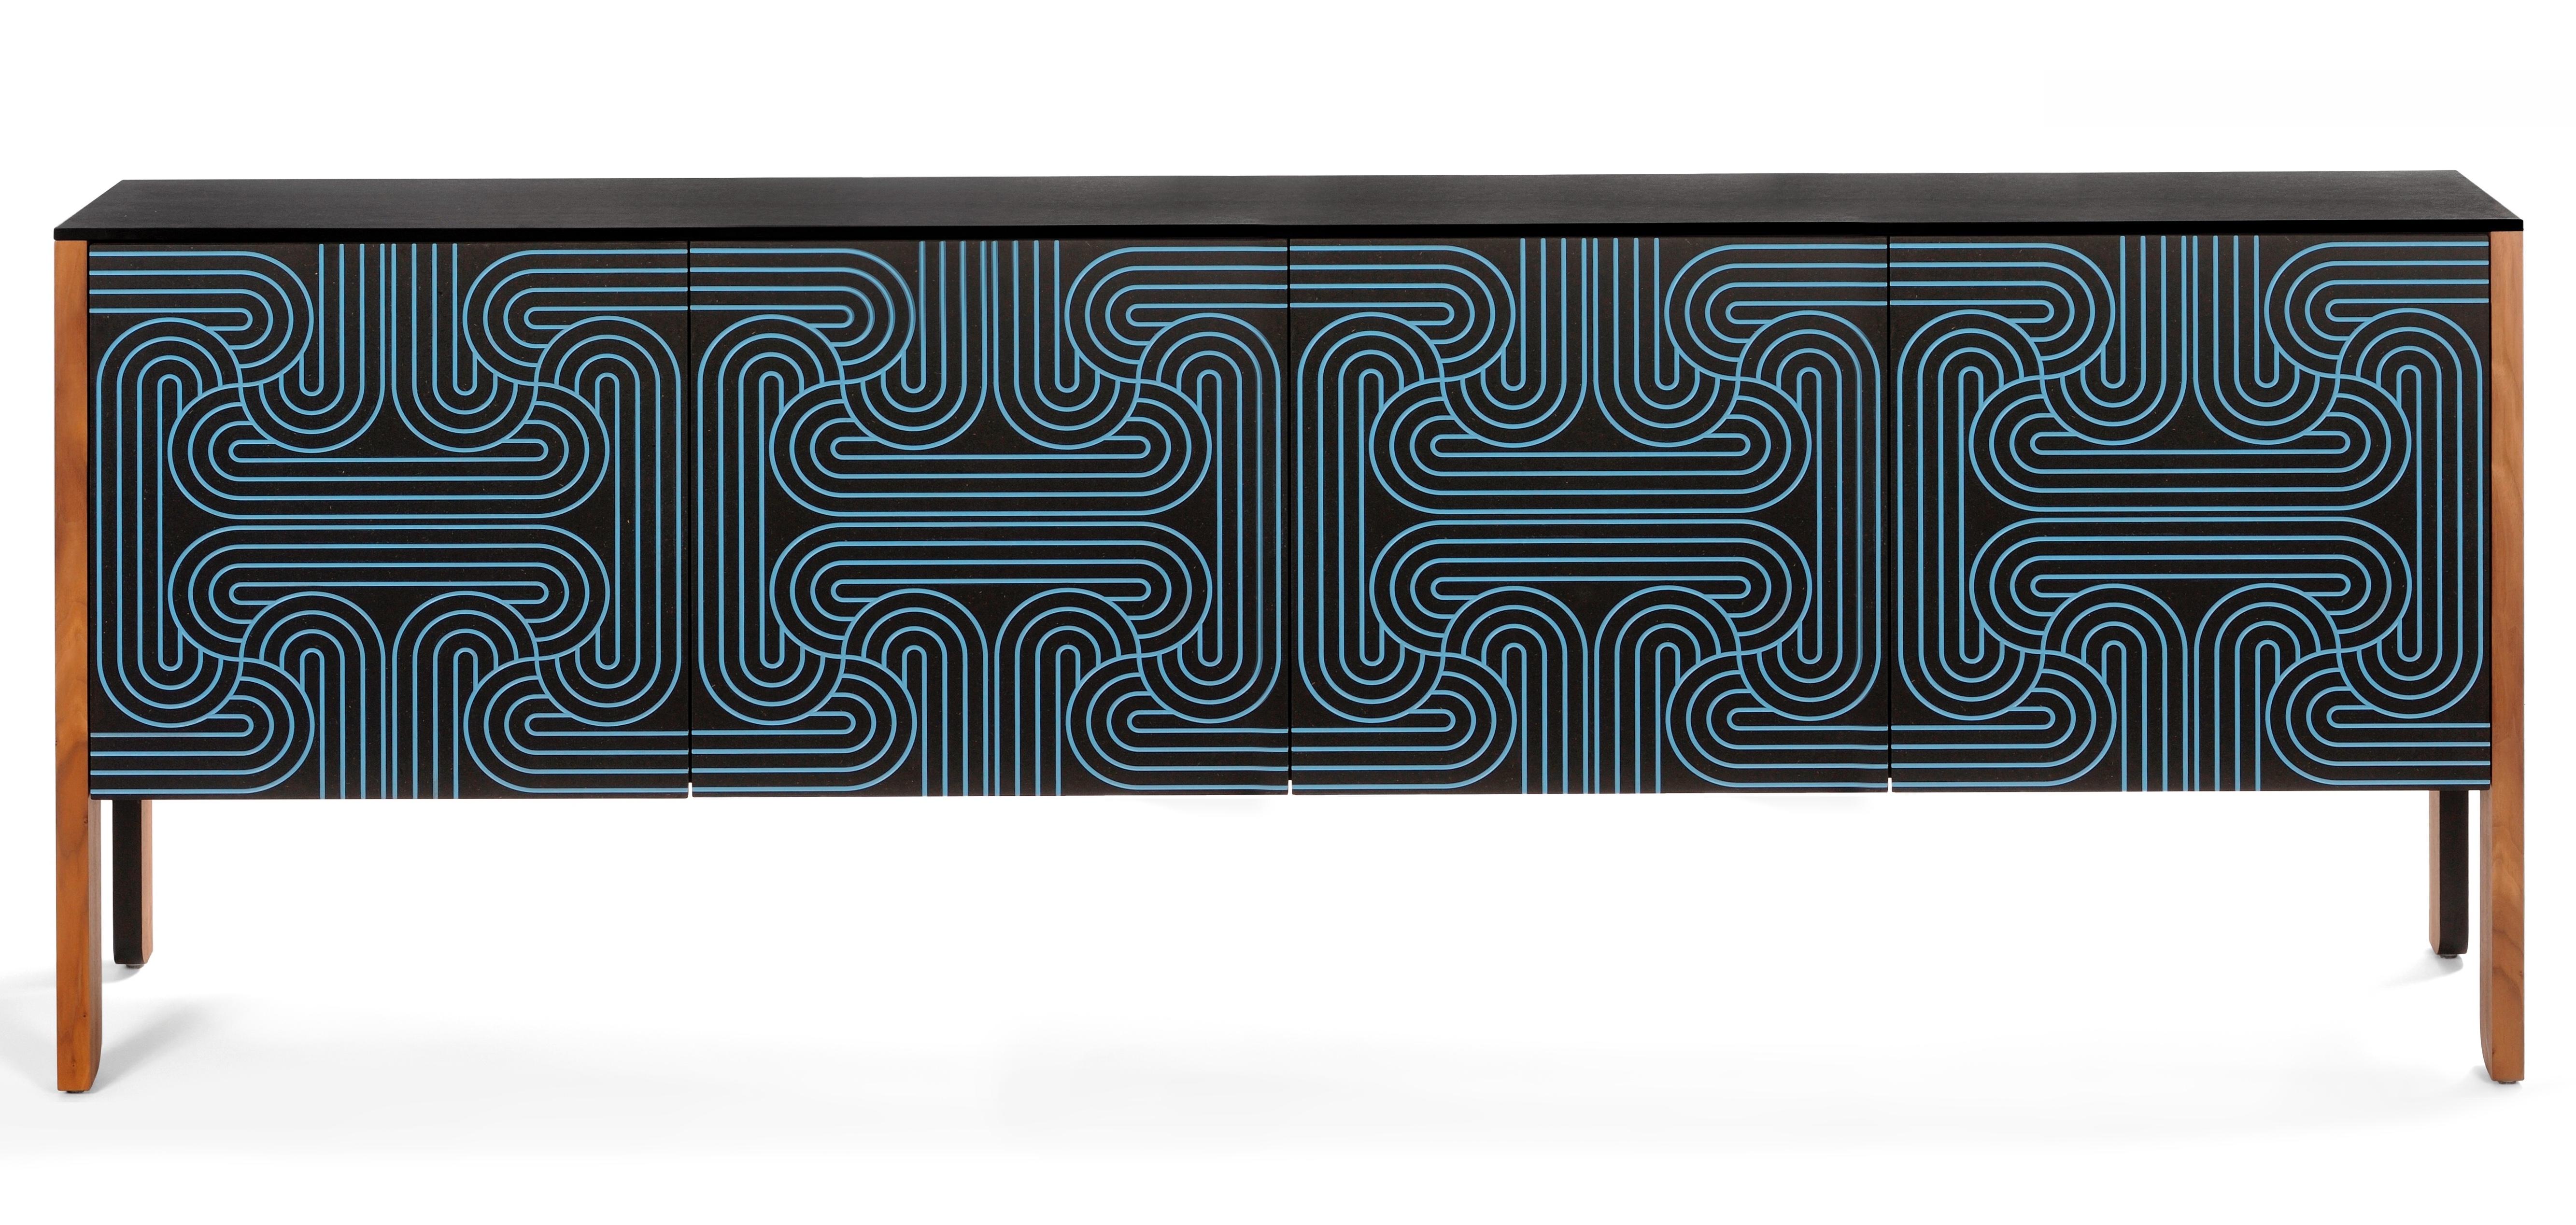 The stunning Loop sideboards are available in a range of colours, including this striking Black version.
The elegant Loop pattern is engraved by a CNC machine, onto the doors and handpainted in a choice of colours ncluding Gold, Blue, Dark